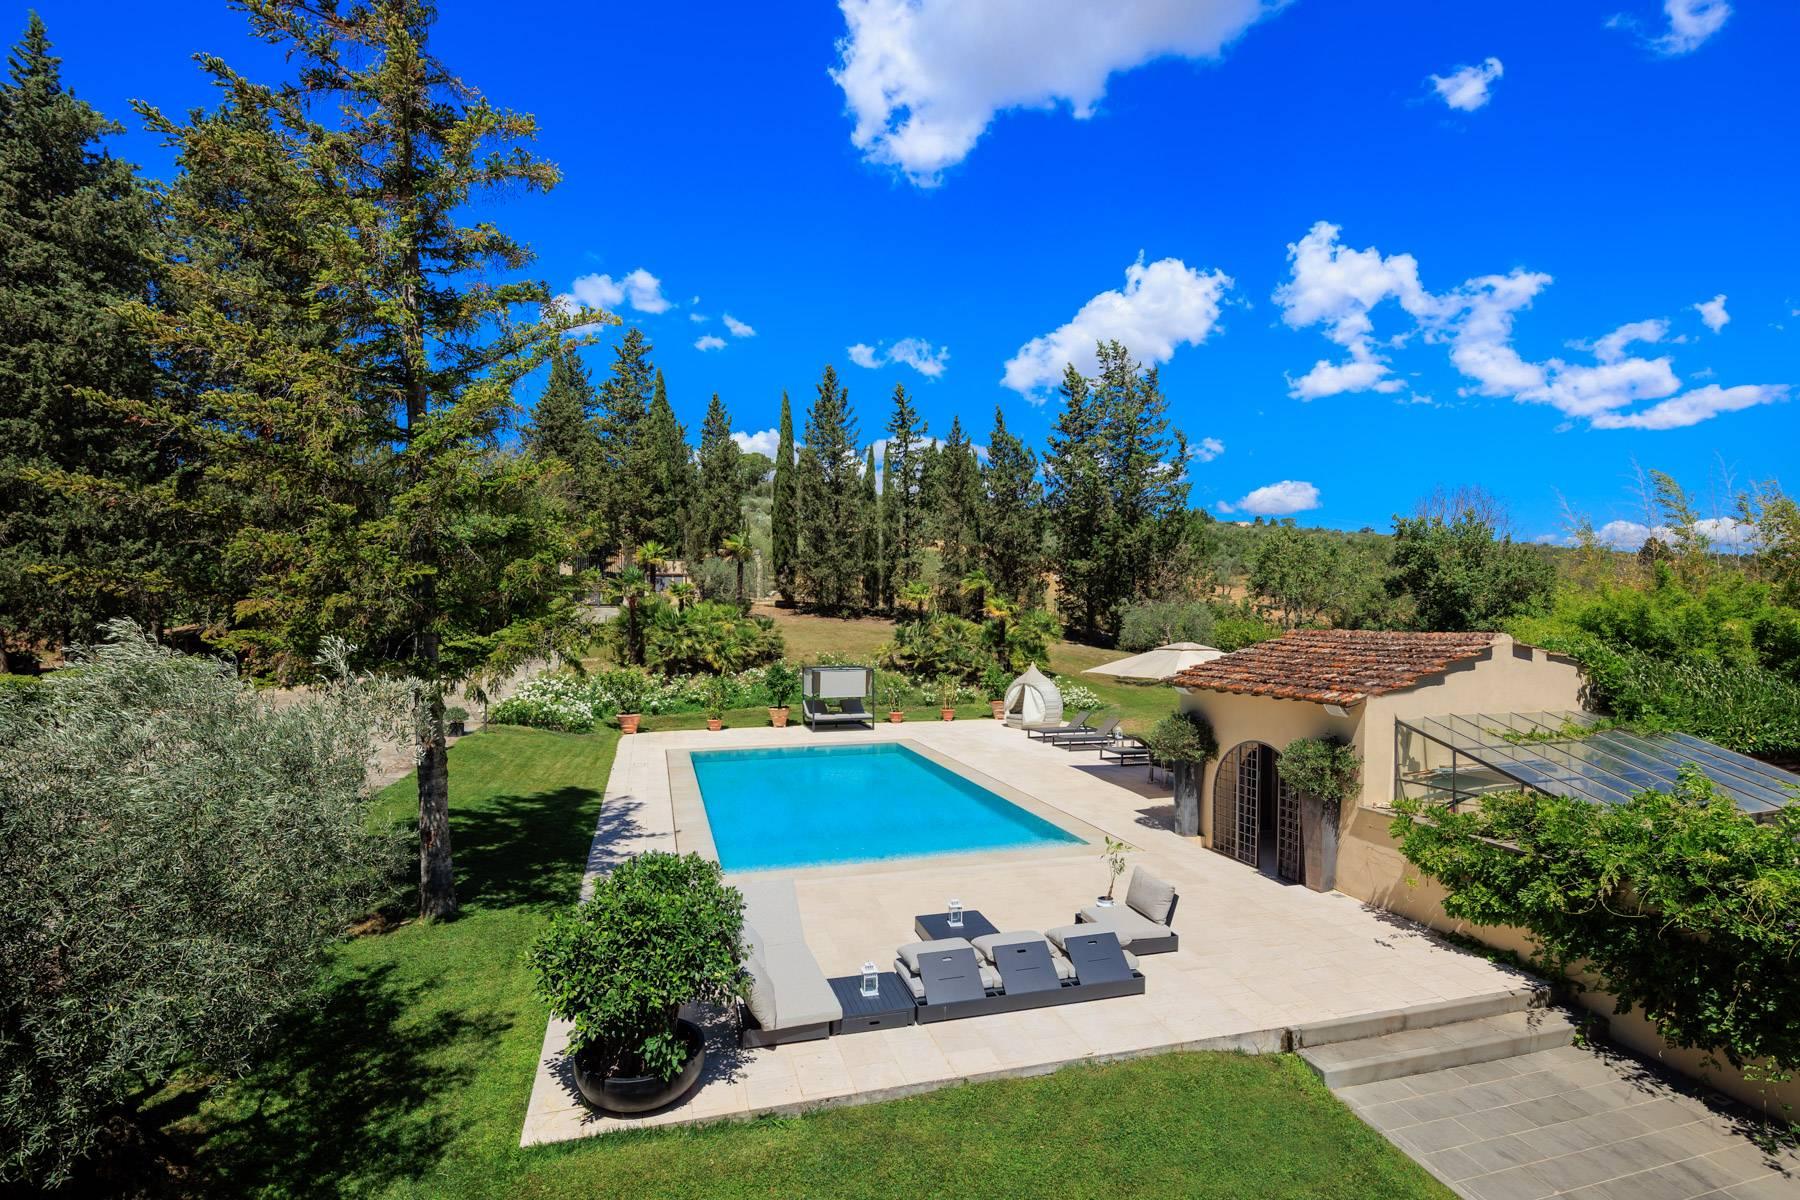 Unprecedented turn-key estate with pool in Impruneta at 15 minutes from Florence - 15